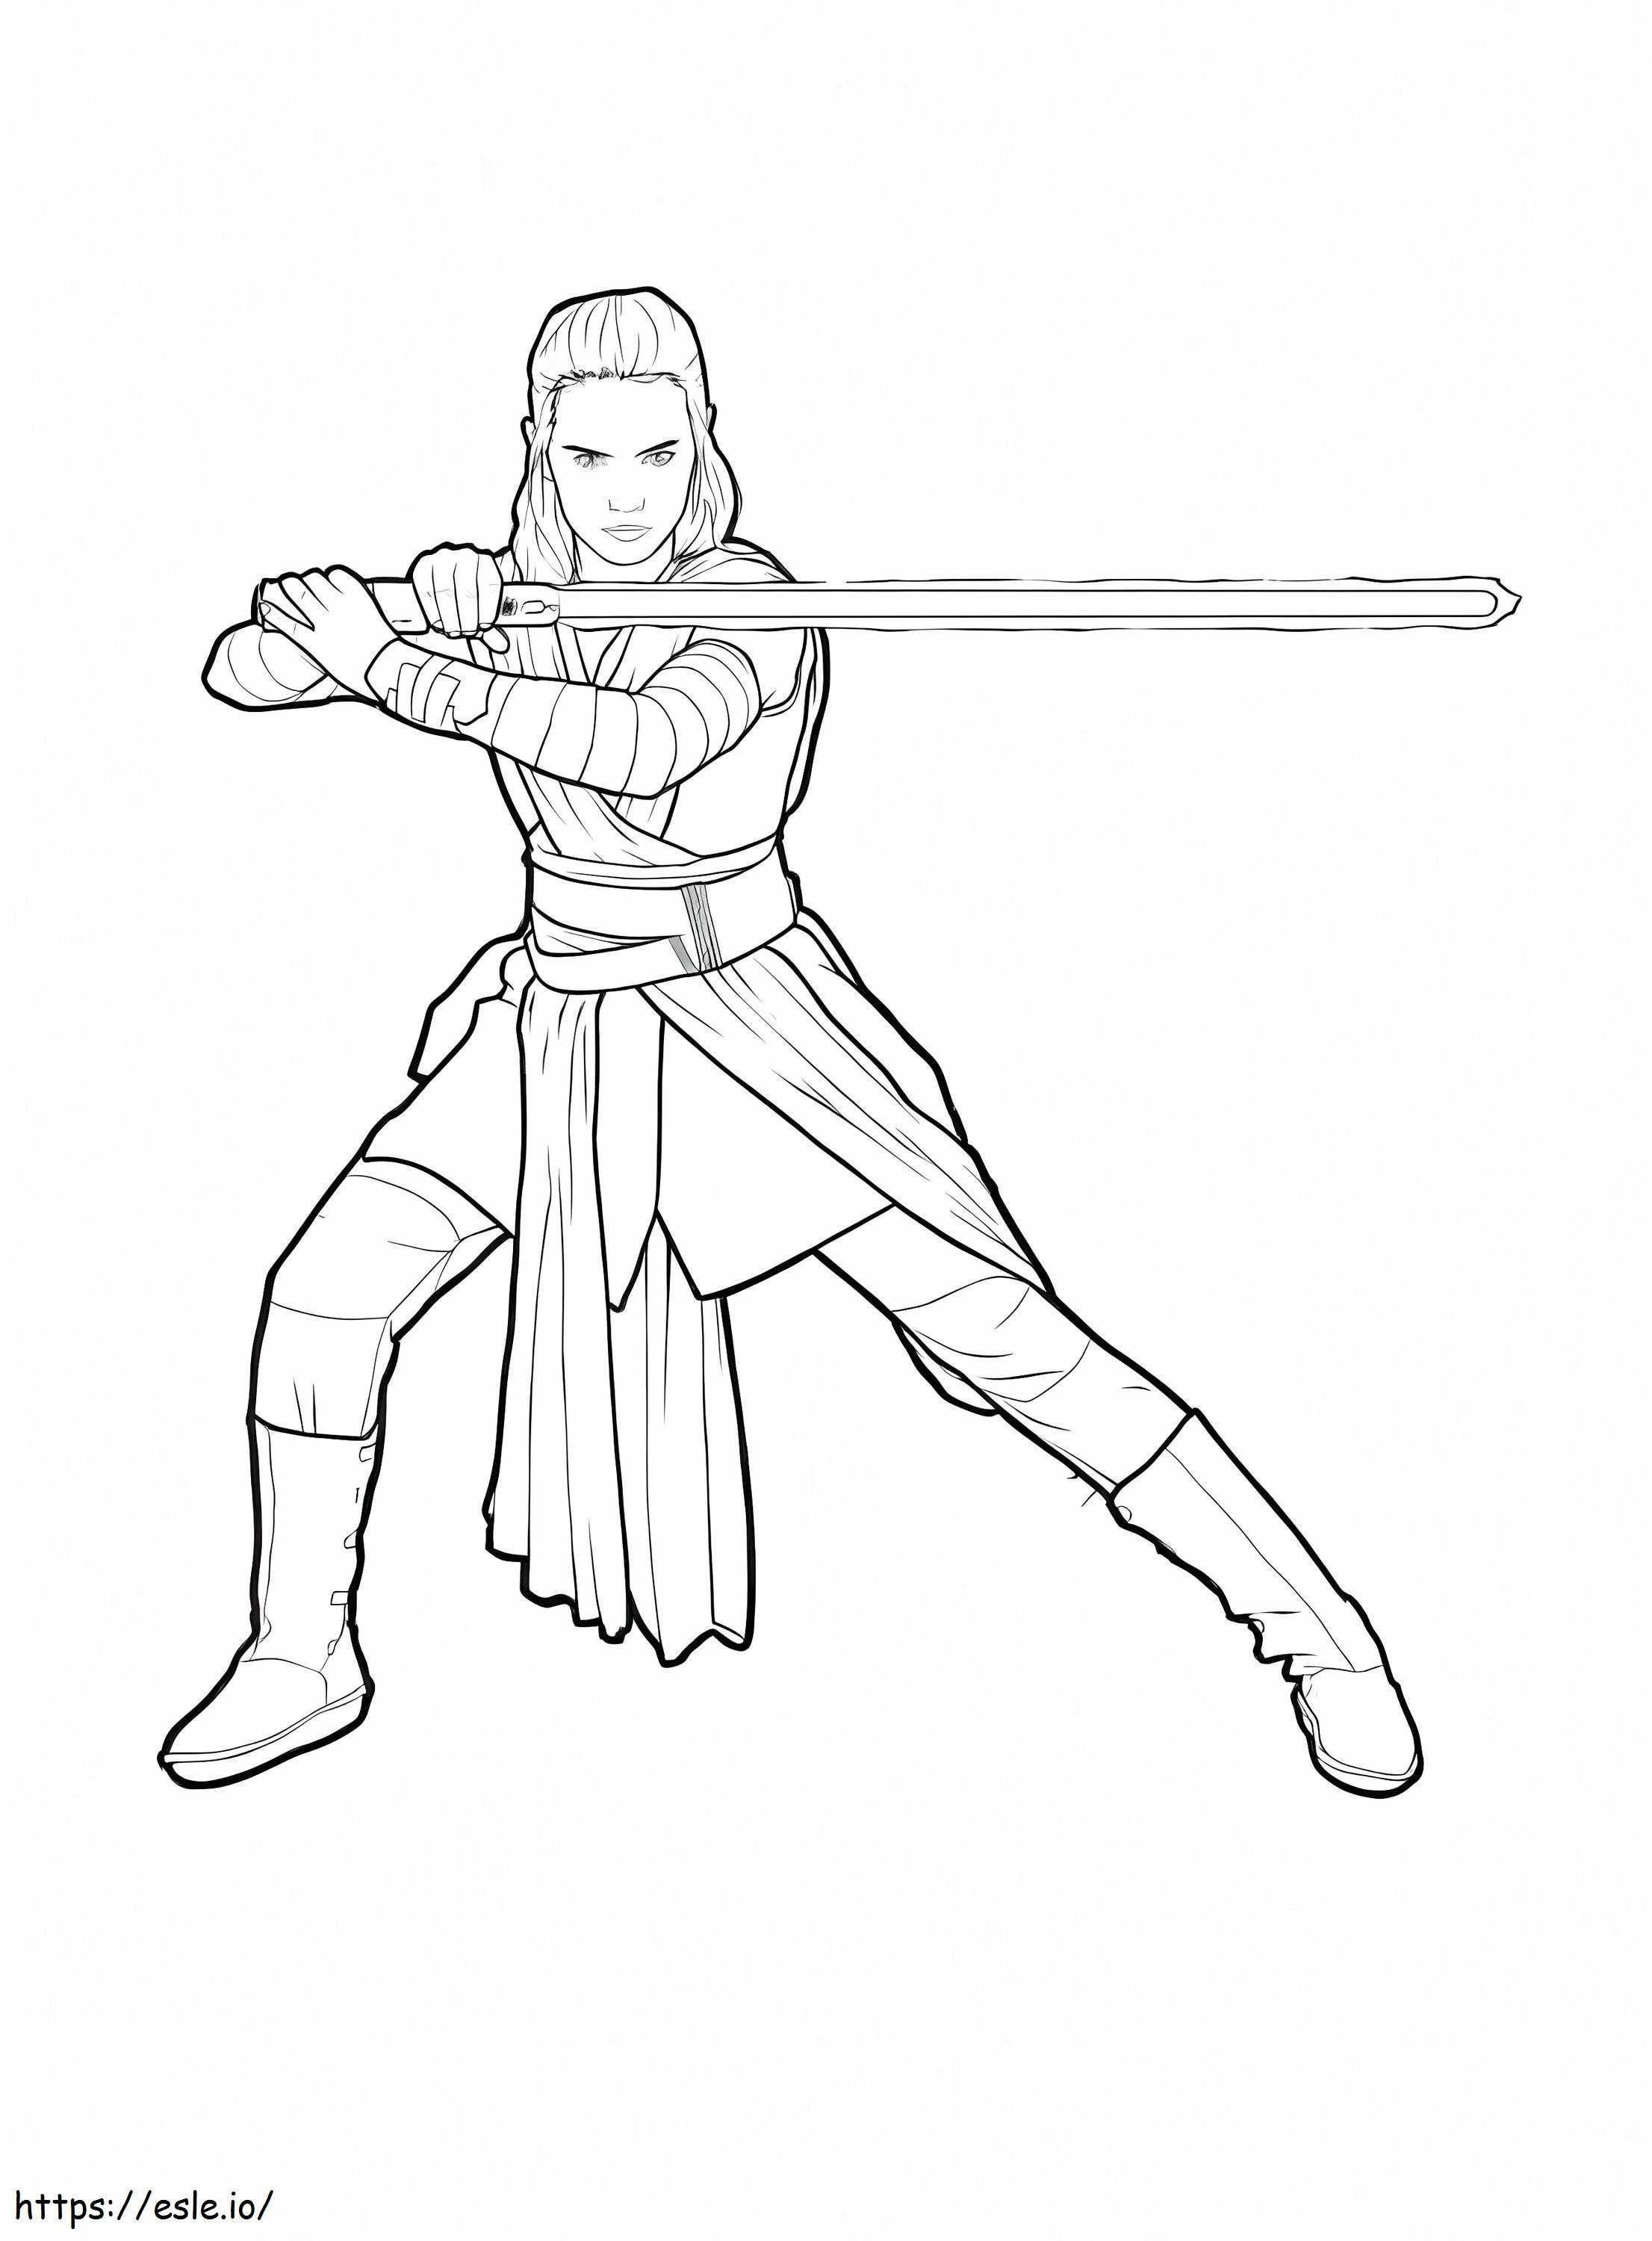 King With Lightsaber coloring page